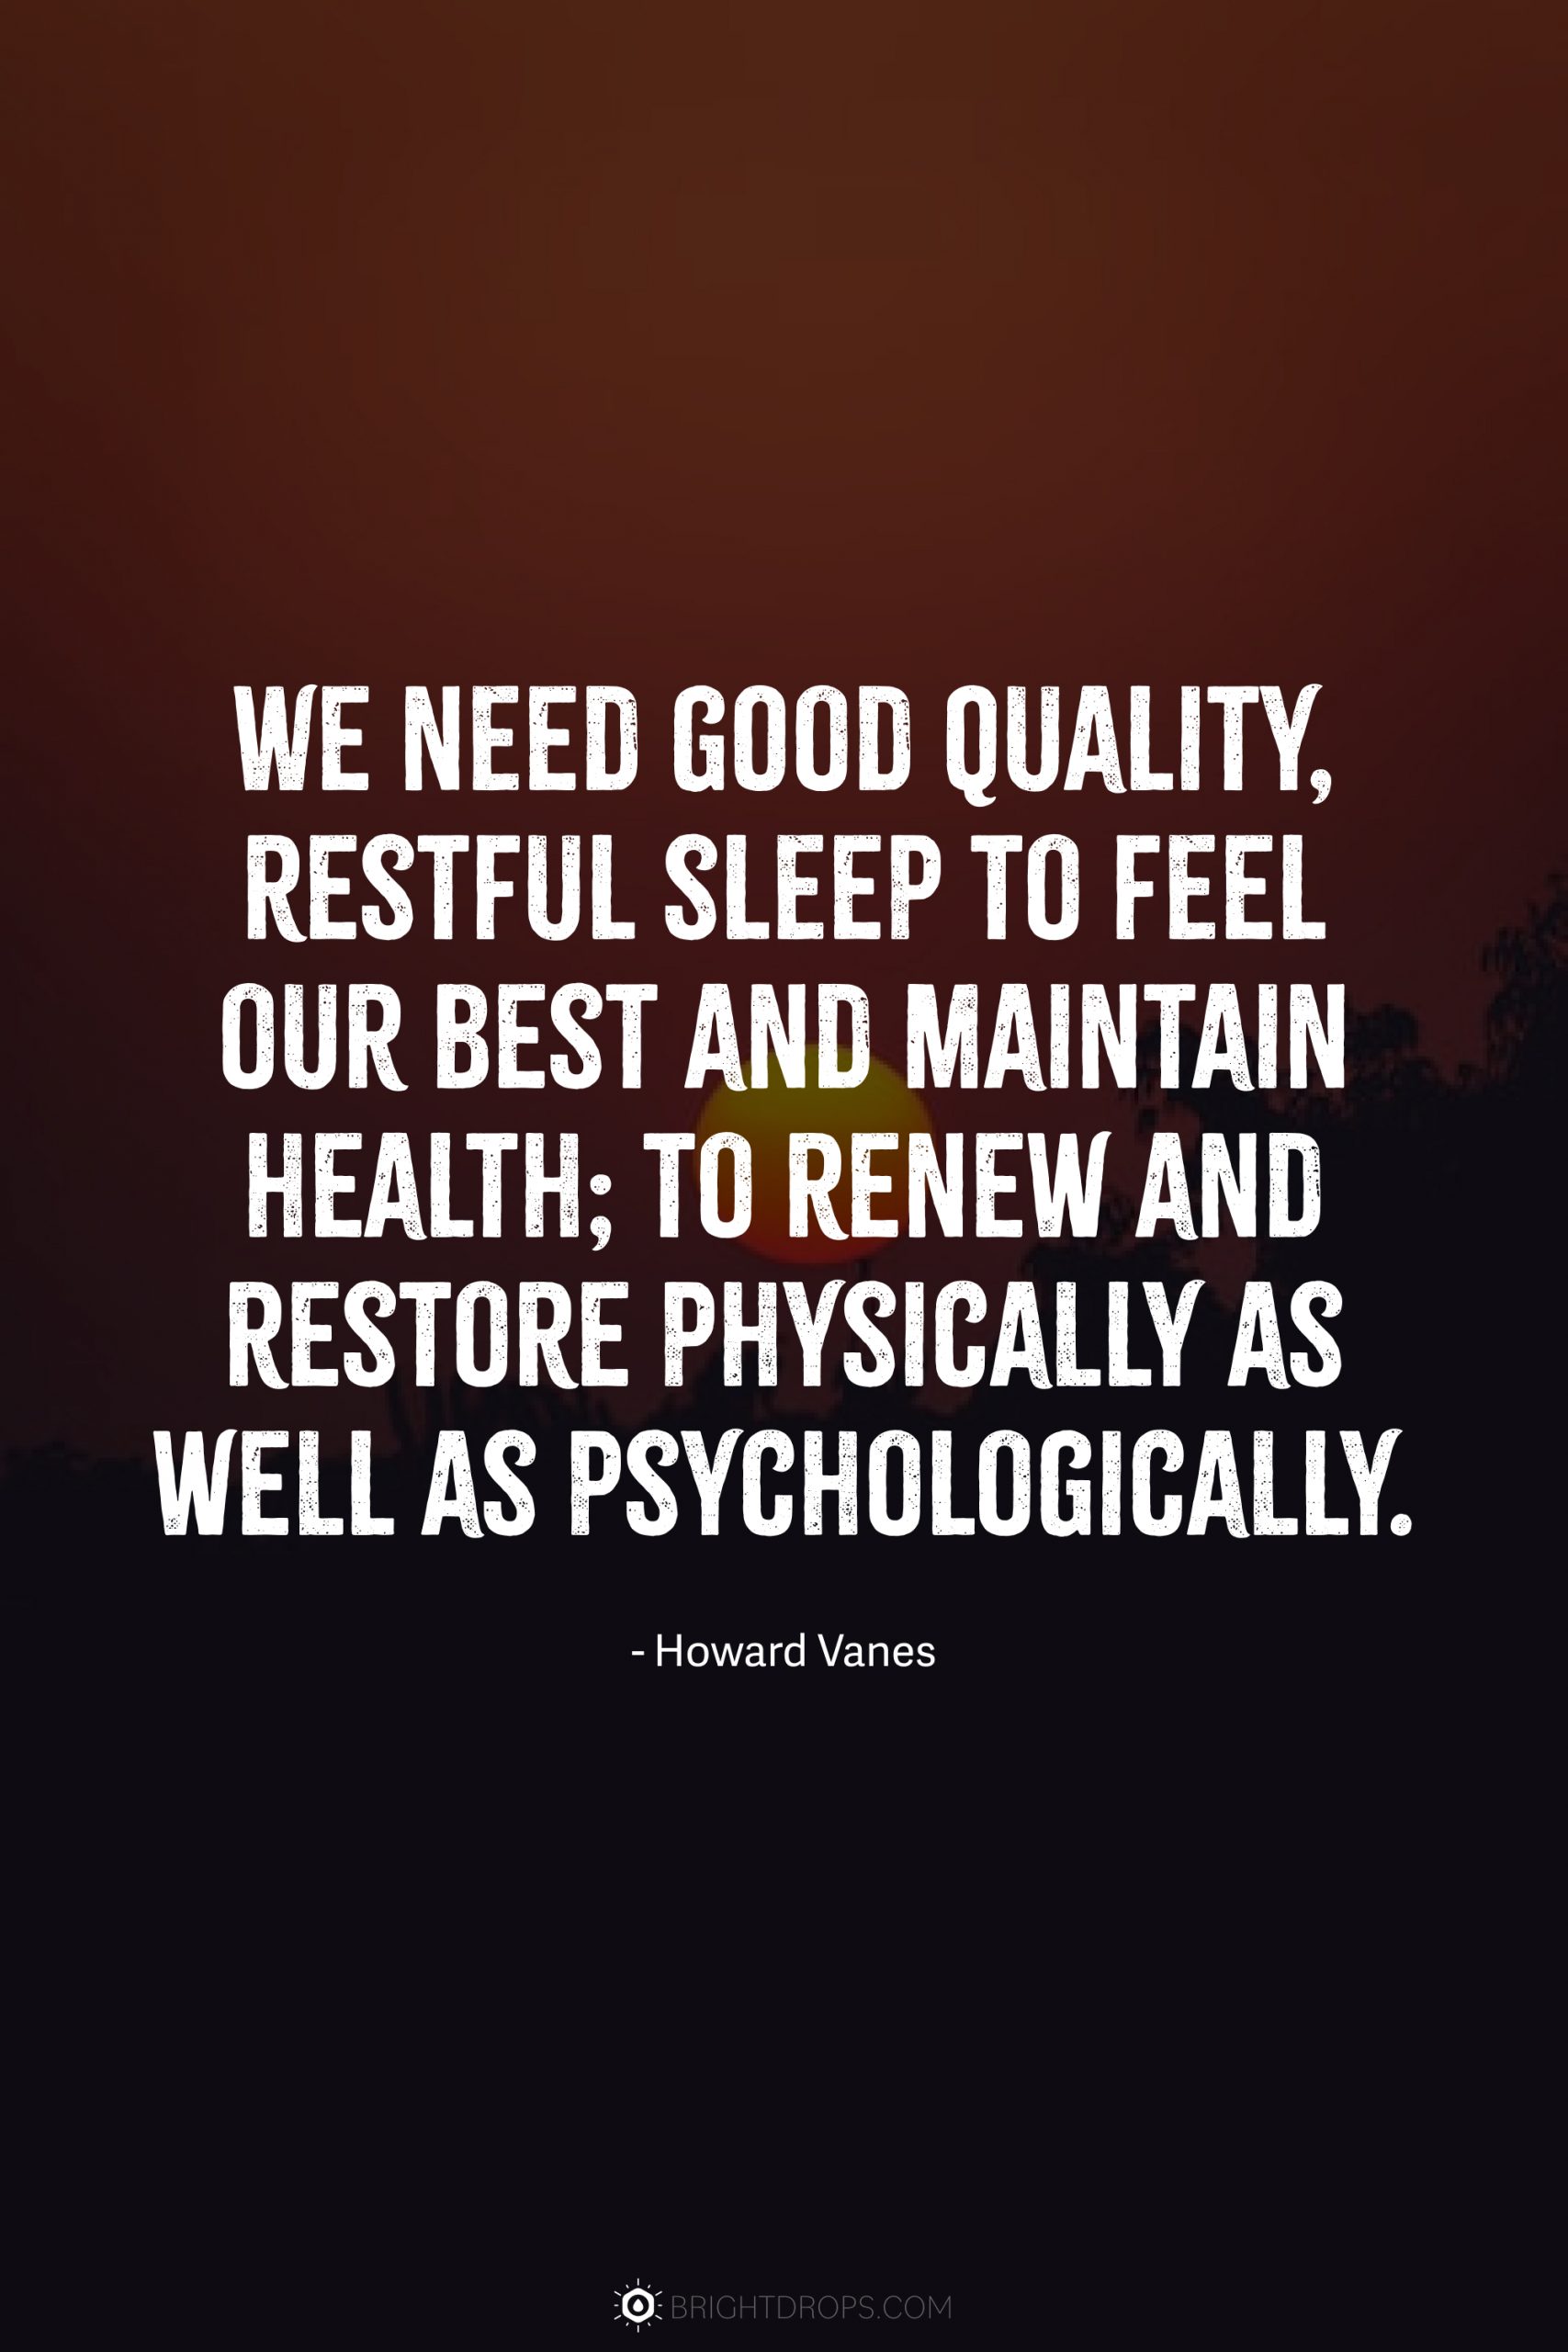 We need good quality, restful sleep to feel our best and maintain health; to renew and restore physically as well as psychologically.